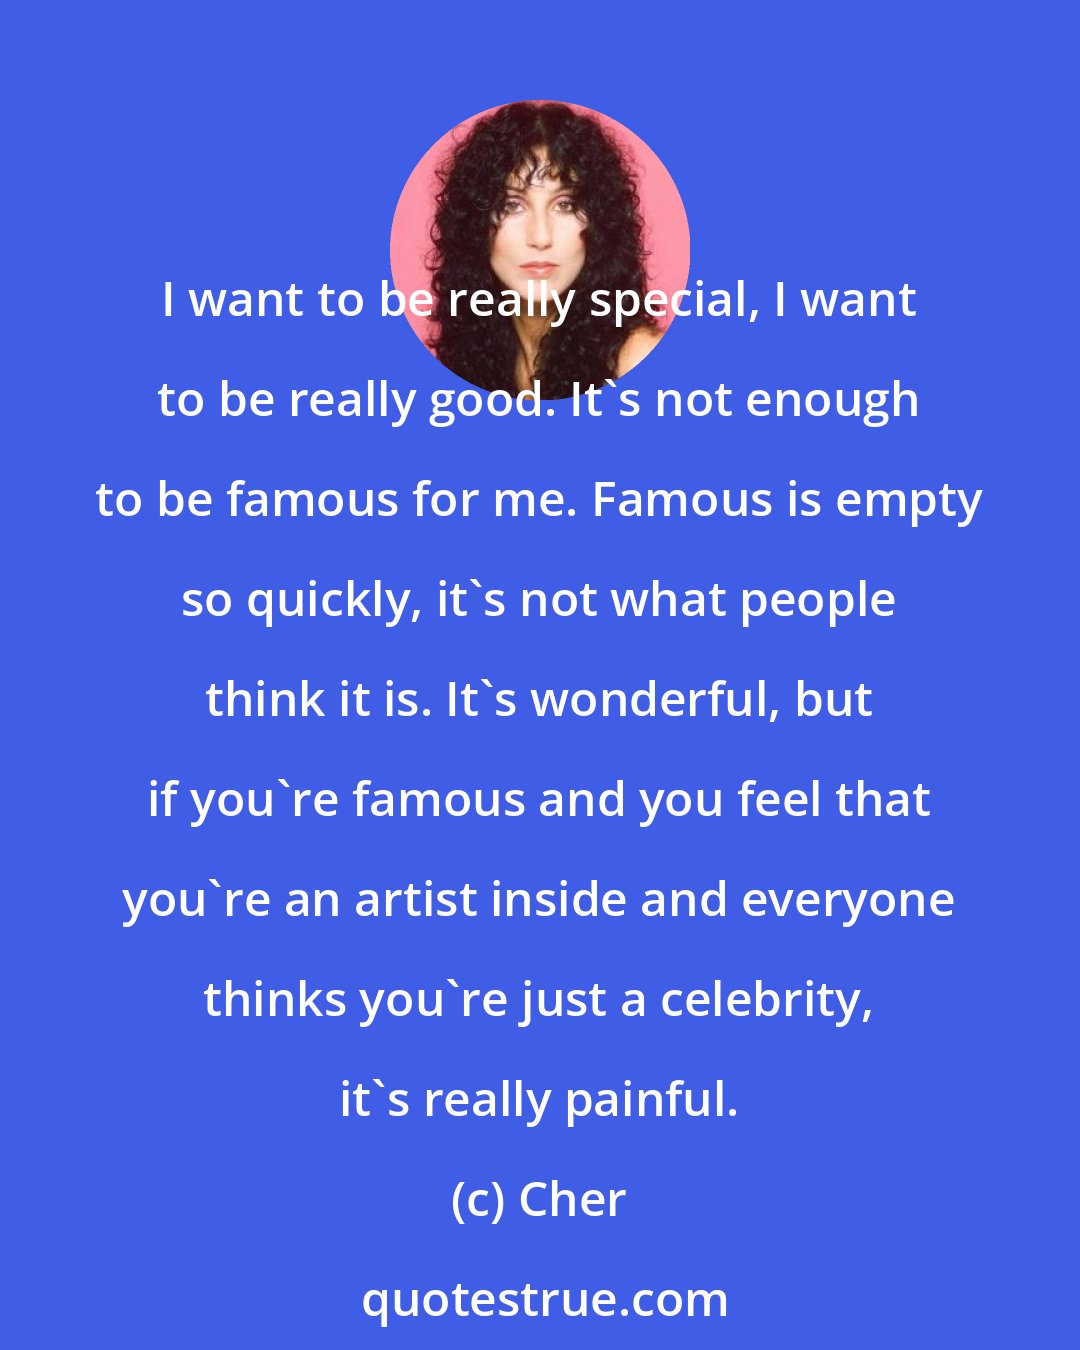 Cher: I want to be really special, I want to be really good. It's not enough to be famous for me. Famous is empty so quickly, it's not what people think it is. It's wonderful, but if you're famous and you feel that you're an artist inside and everyone thinks you're just a celebrity, it's really painful.